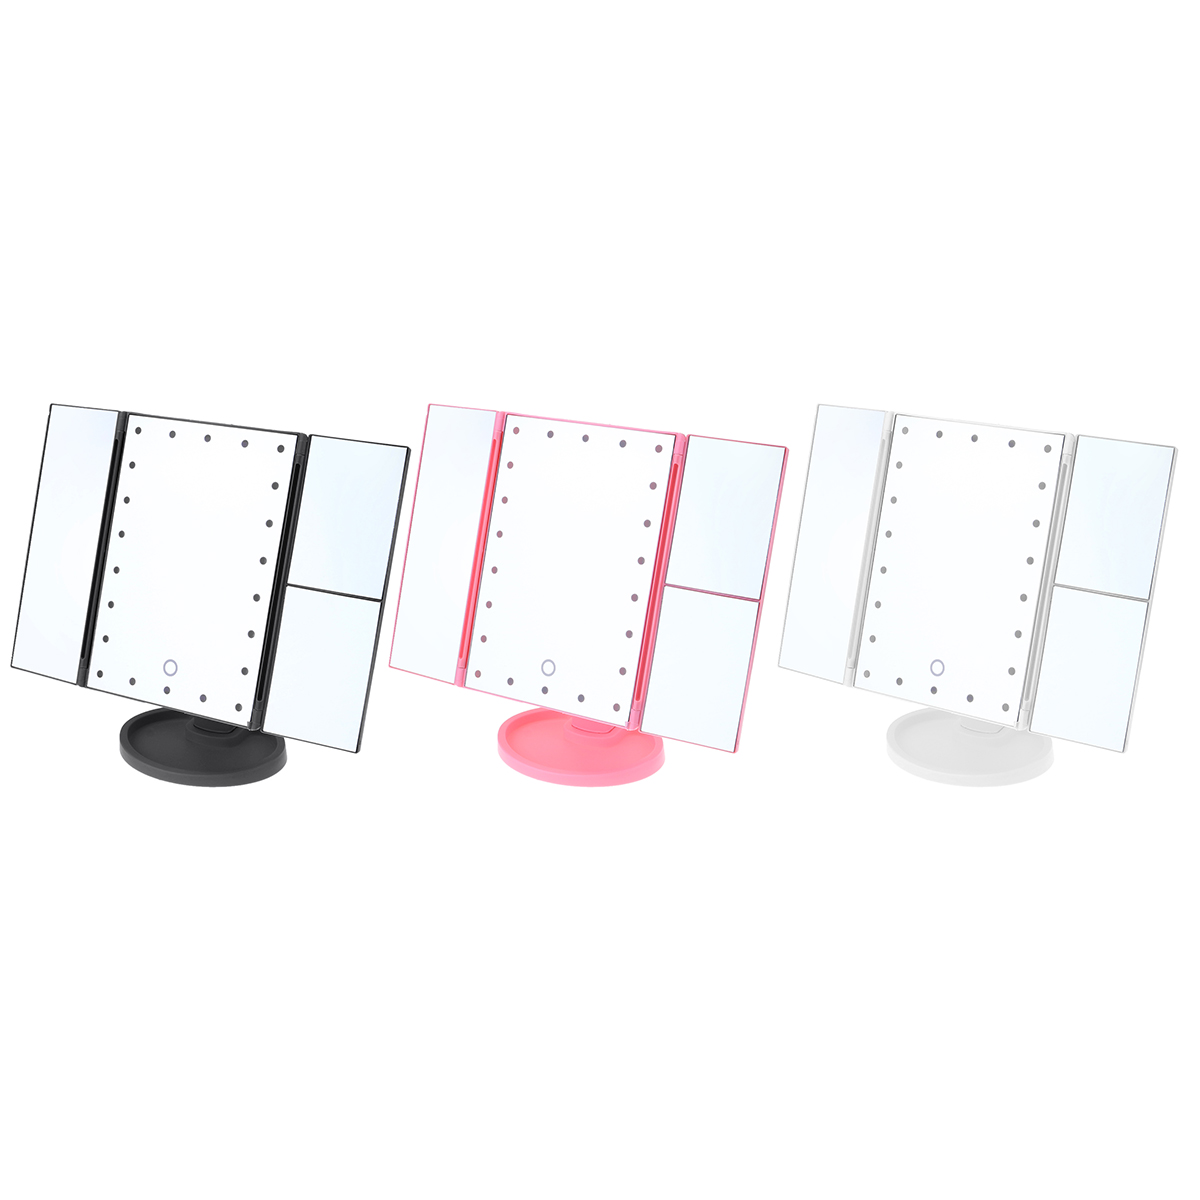 Find 22LED Tri Fold Touch Screen Makeup Mirror Table Cosmetic Vanity Light Mirror for Sale on Gipsybee.com with cryptocurrencies